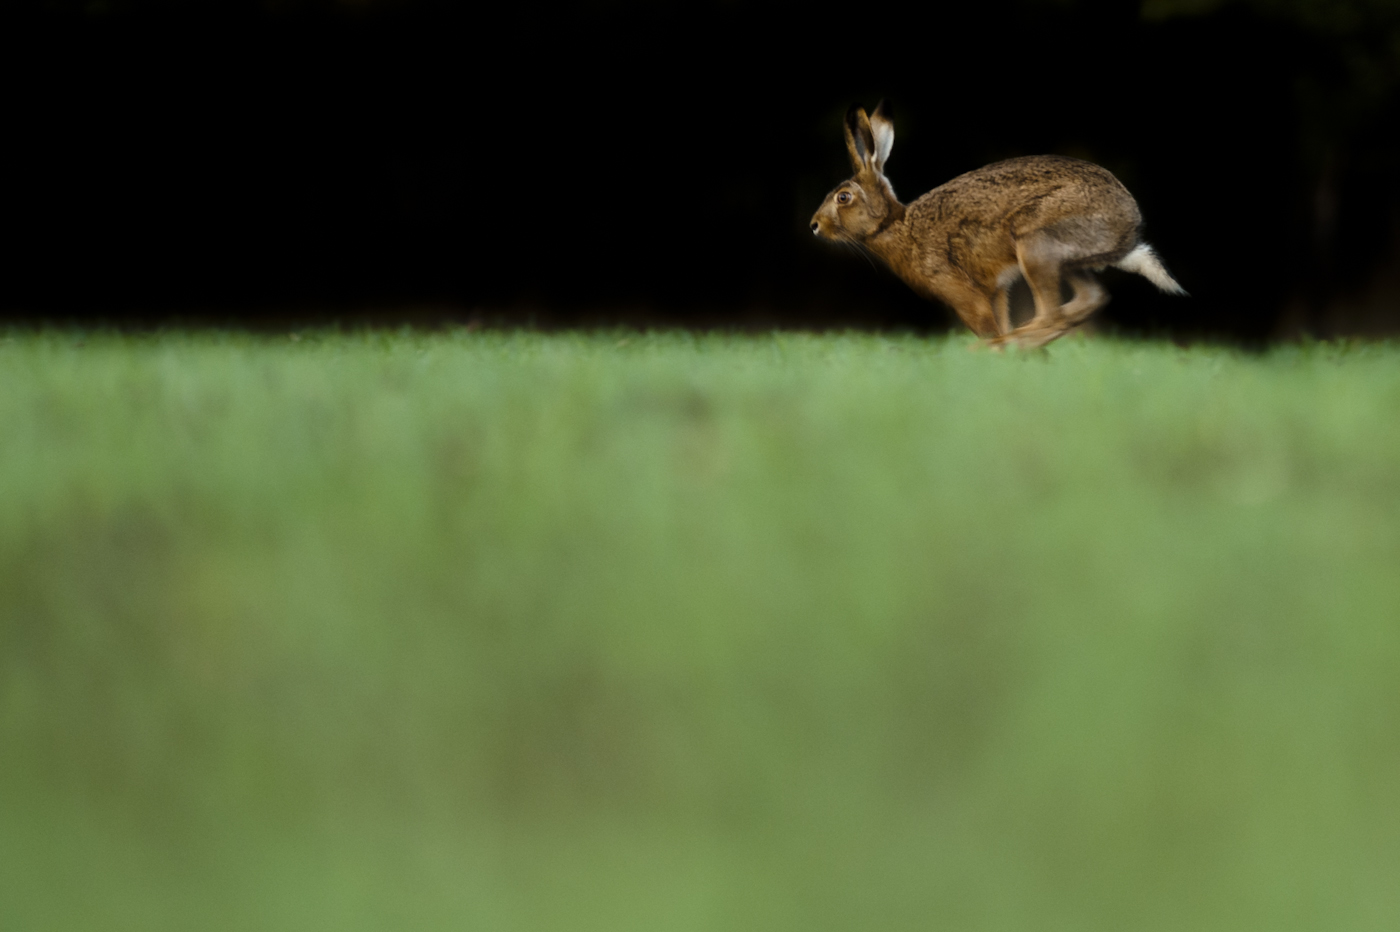 At 45mph panning can create some excellent images of Hares